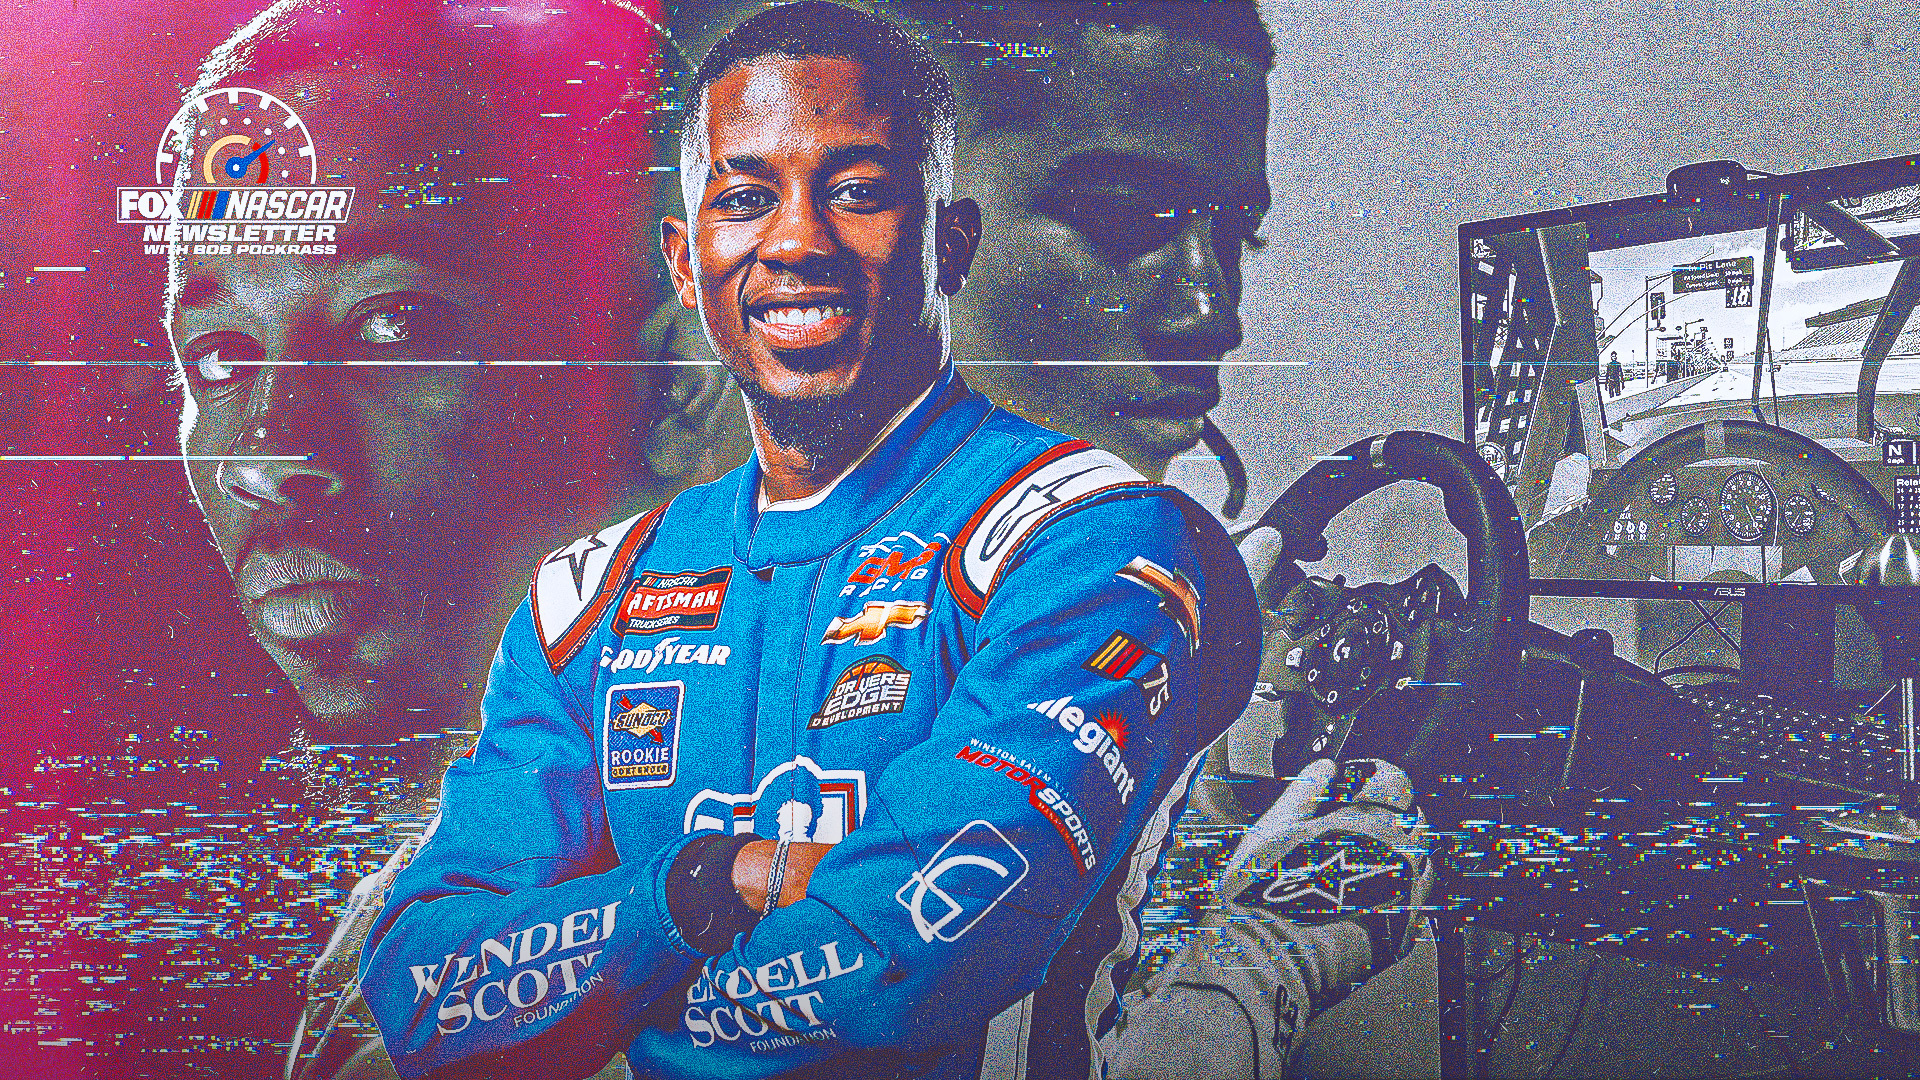 From Lightning McQueen to iRacing: Inside Rajah Caruth's unique path to NASCAR